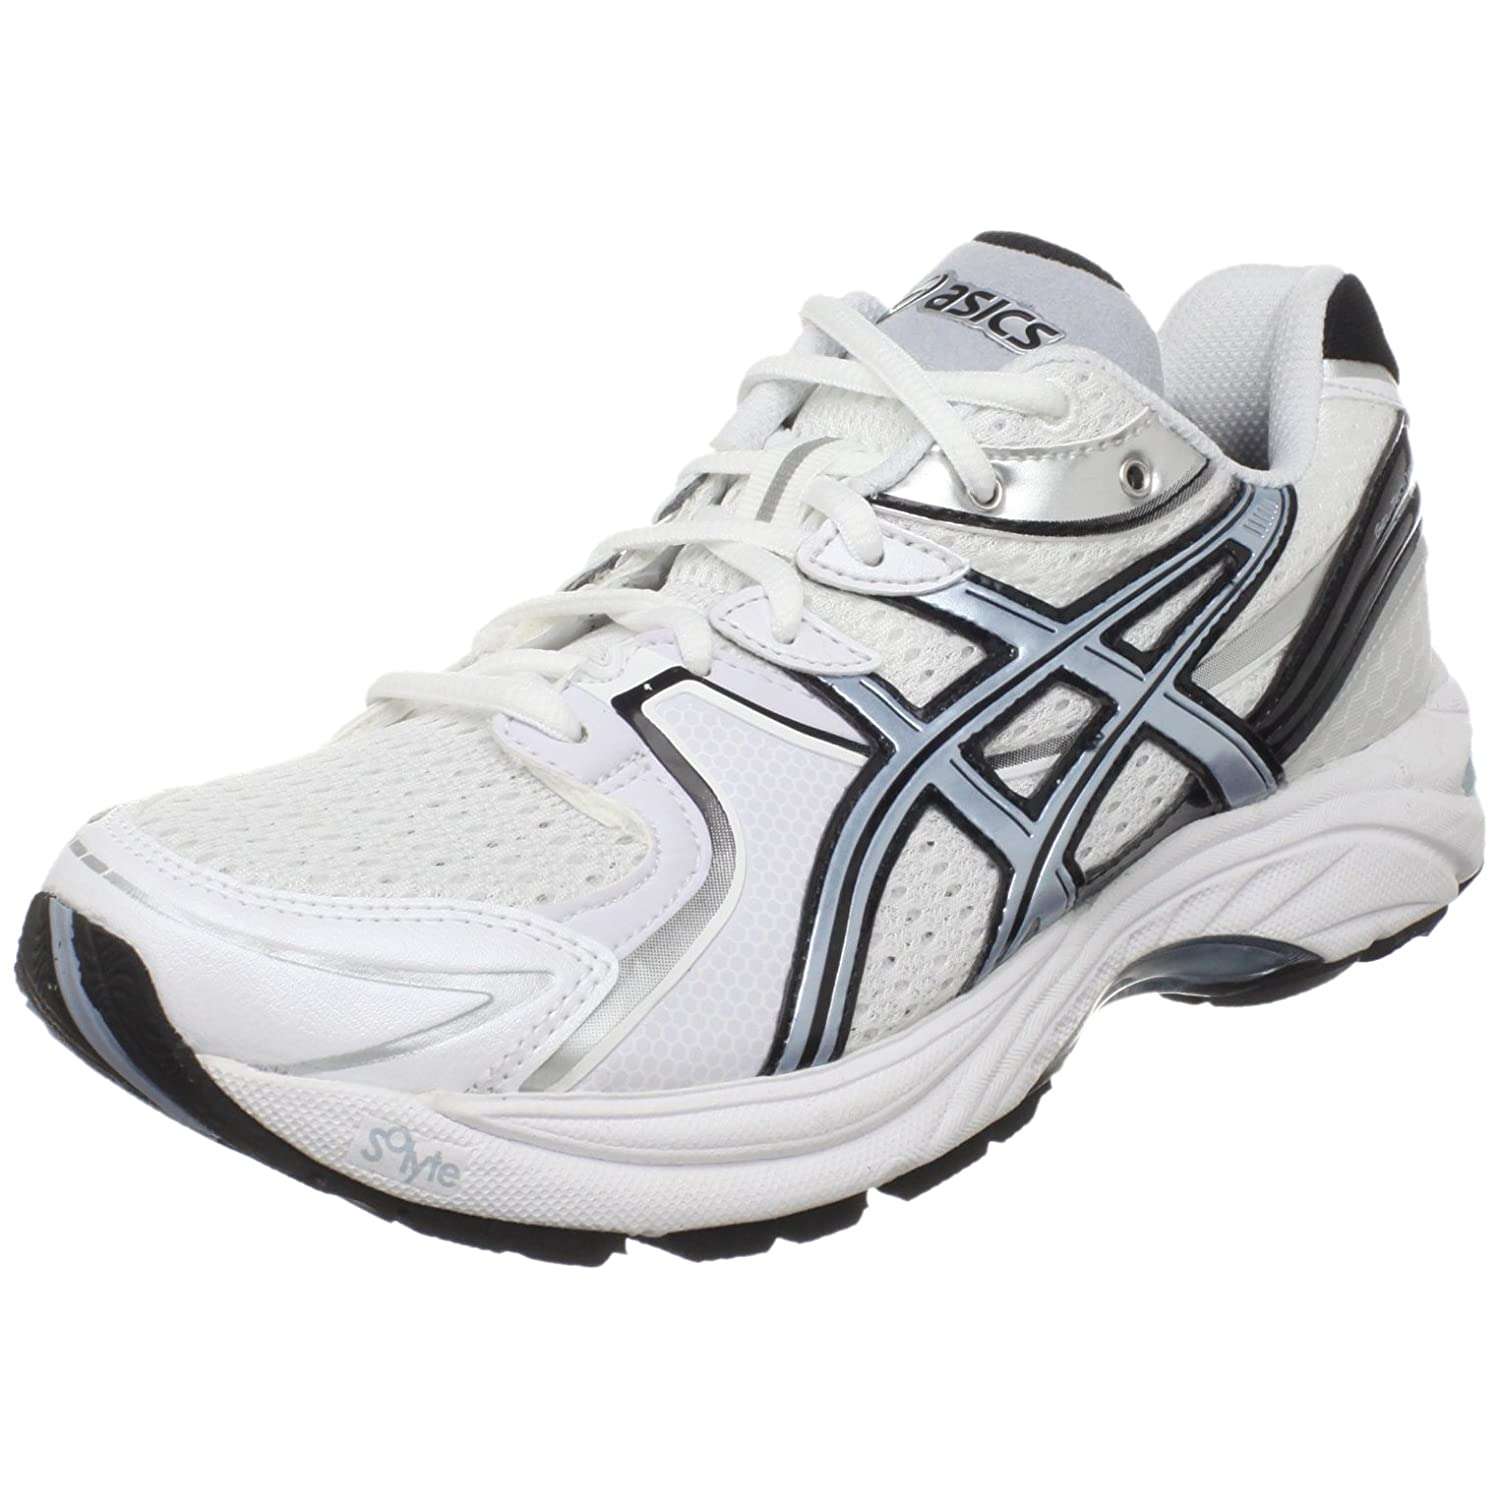 Best Walking Shoes For Bad Knees